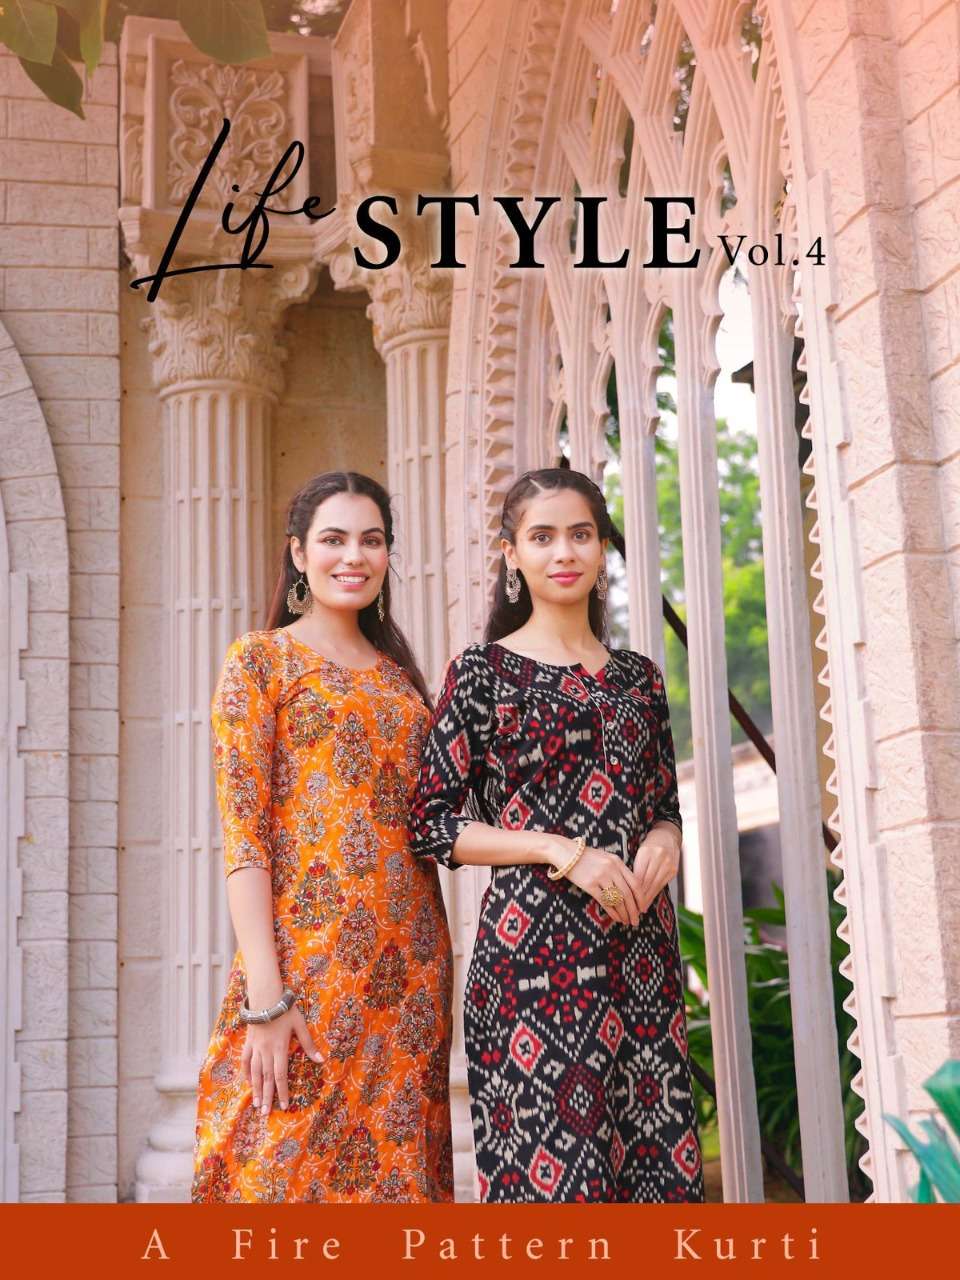  LIFESTYLE VOL 4 - CASUAL HEAVY RAYON KURTI BY PK WHOLESALER AND DEALER